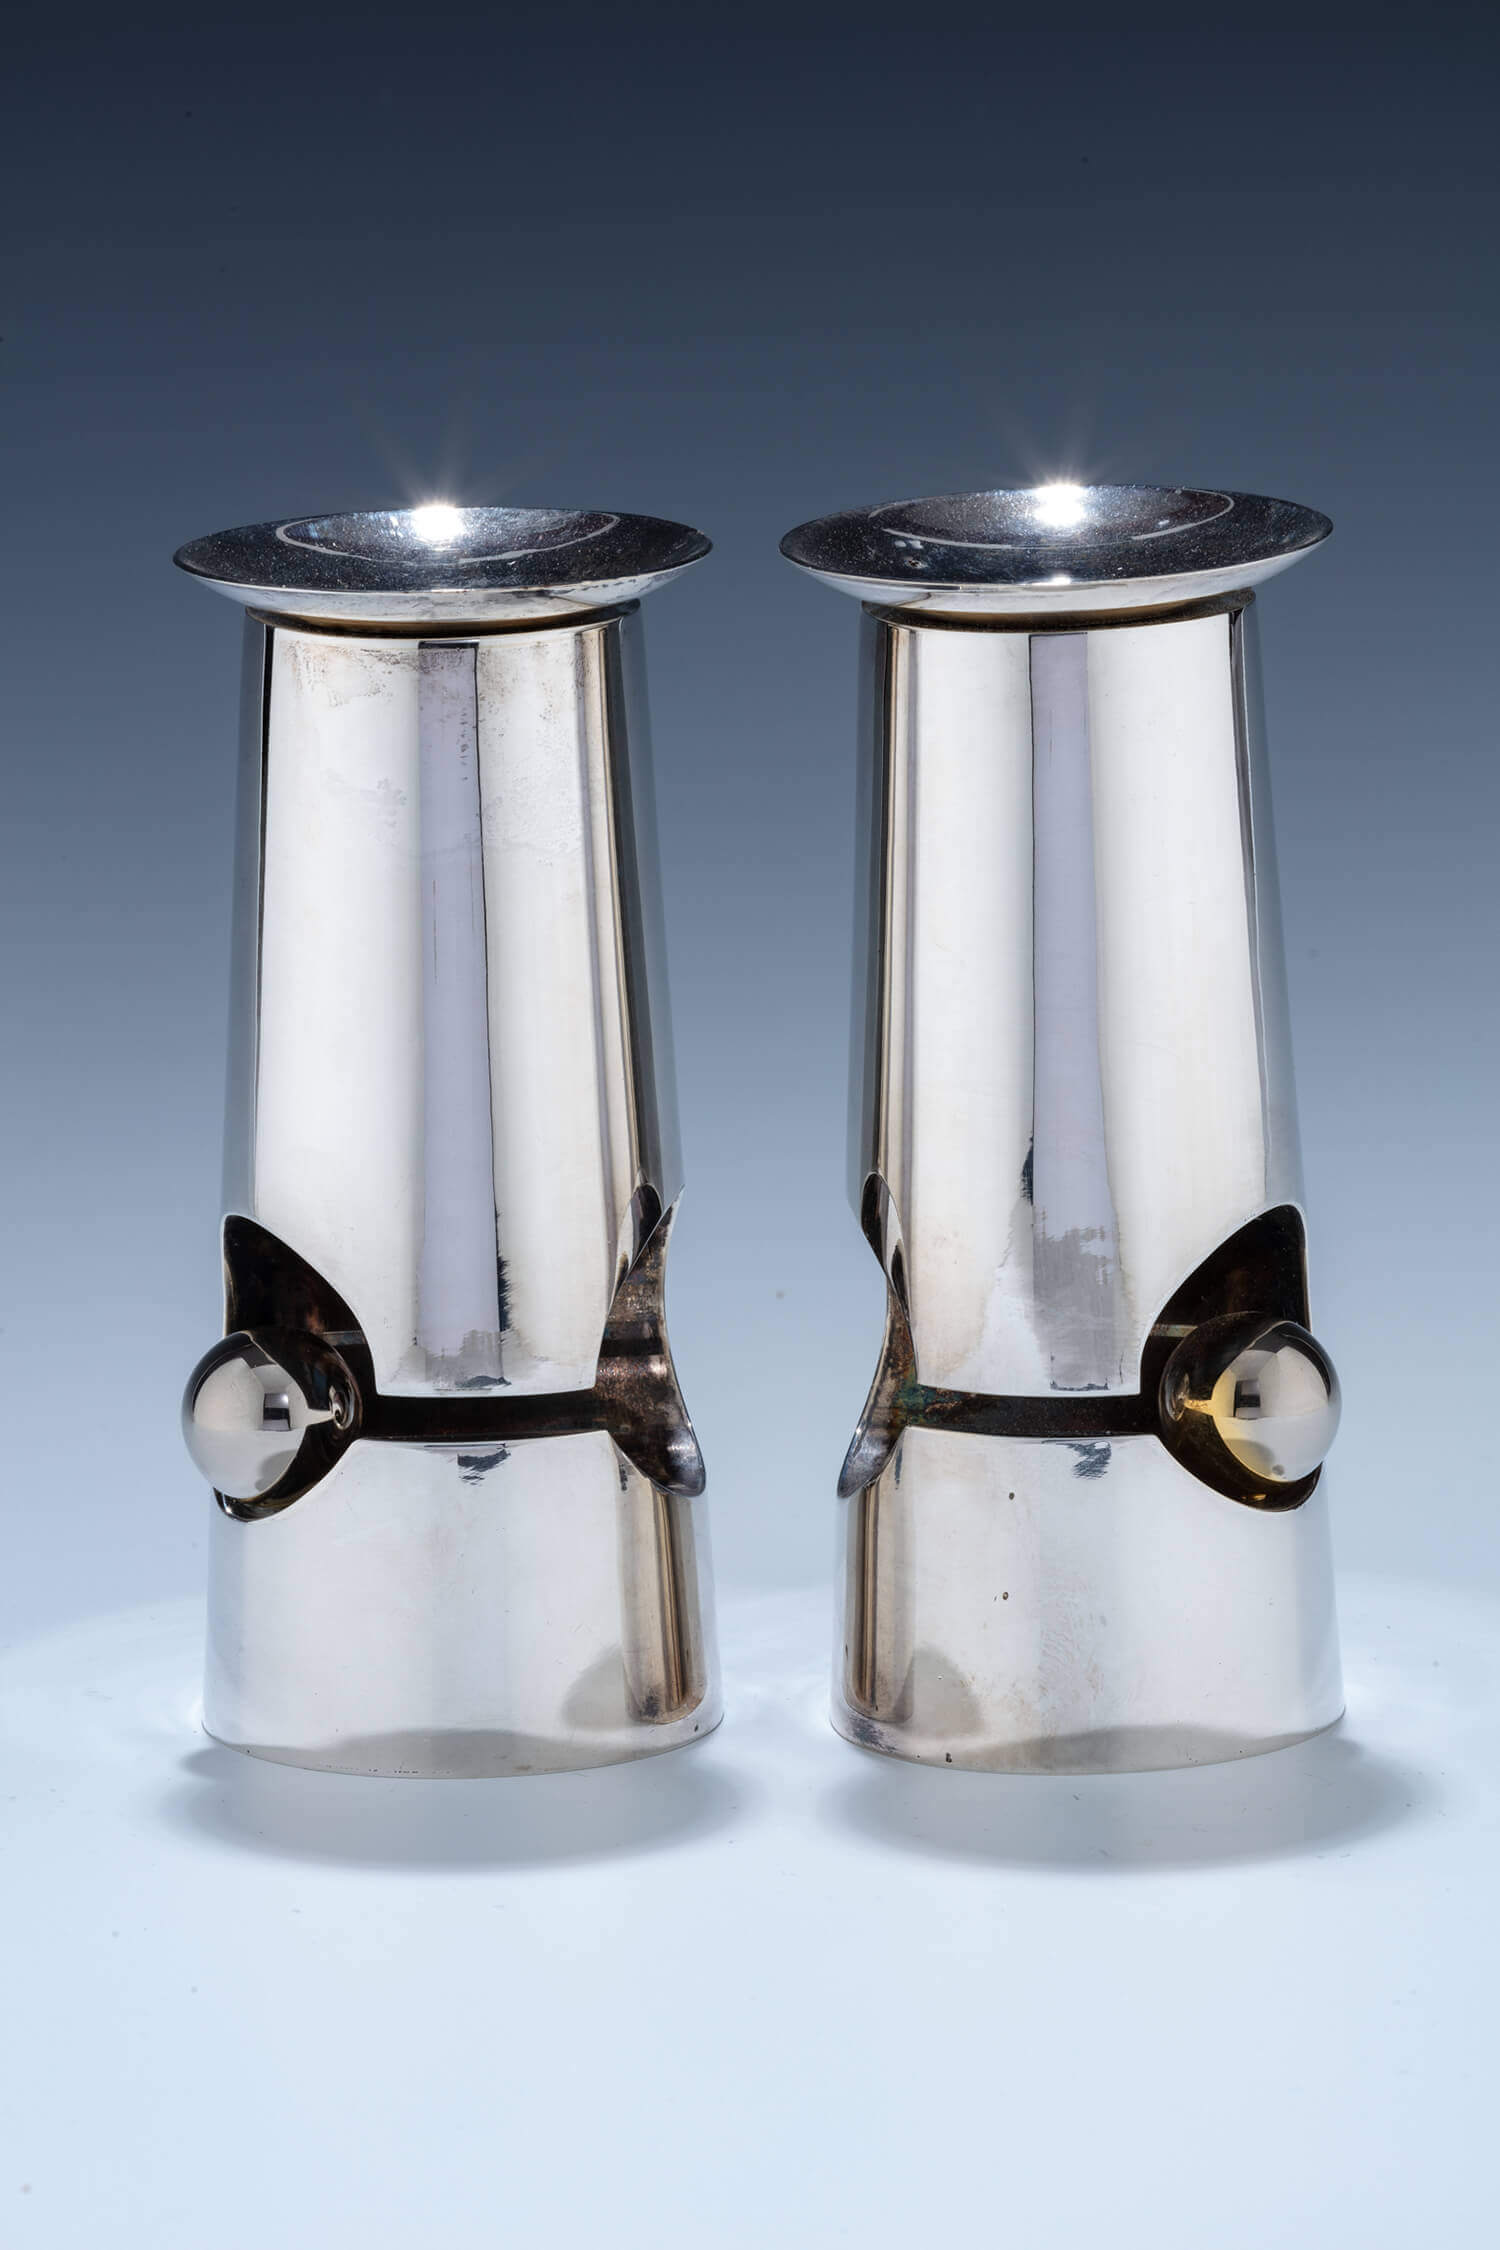 167. A PAIR OF STERLING SILVER CANDLESTICKS BY CARMEL SHABI